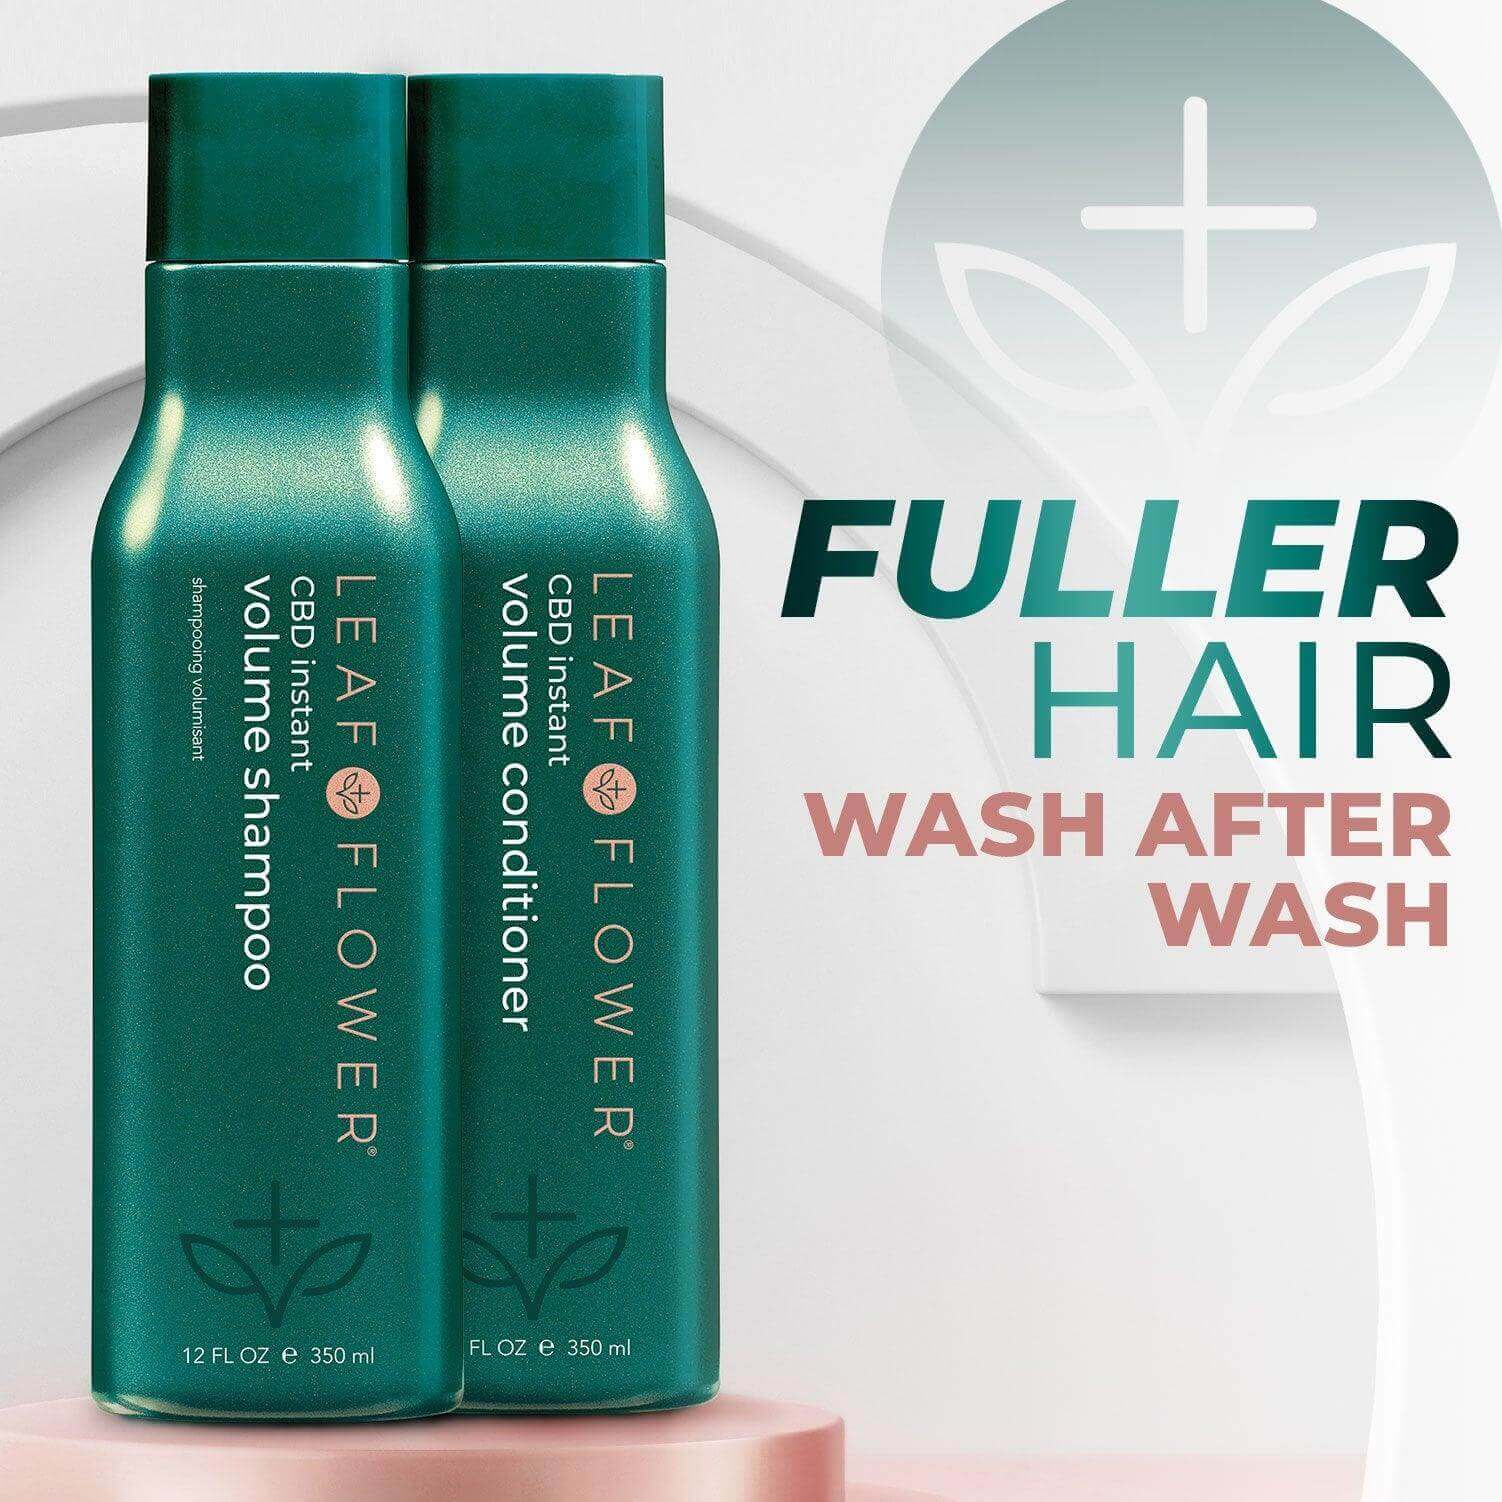 The Leaf and Flower Instant Volume Conditioner is the perfect solution to plump fine hair, leaving you with fuller locks wash after wash.